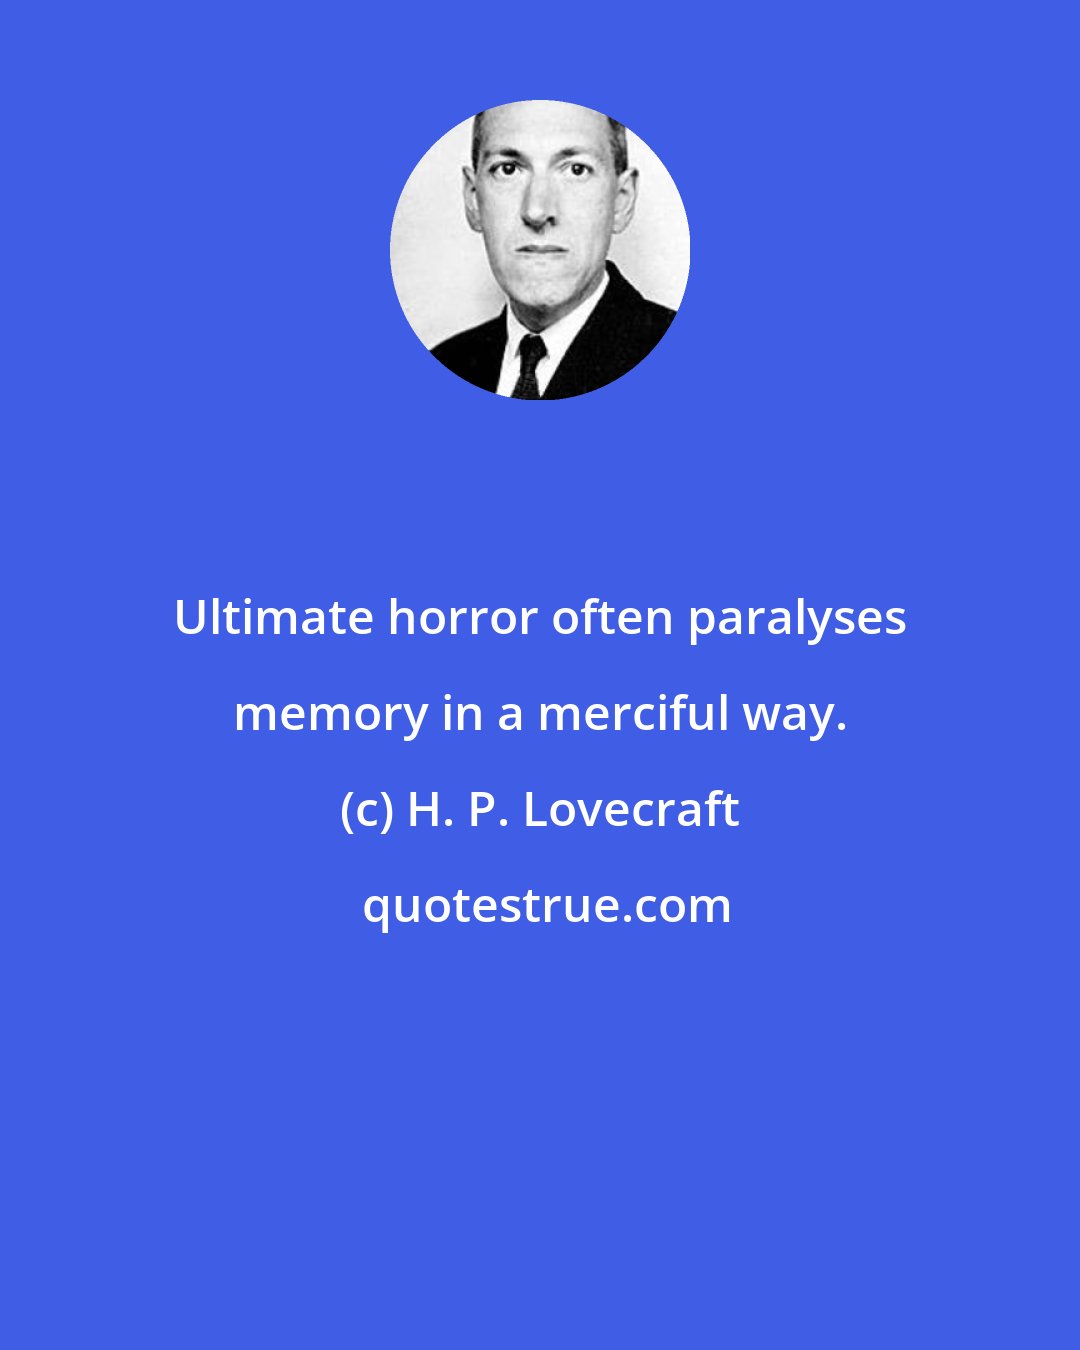 H. P. Lovecraft: Ultimate horror often paralyses memory in a merciful way.